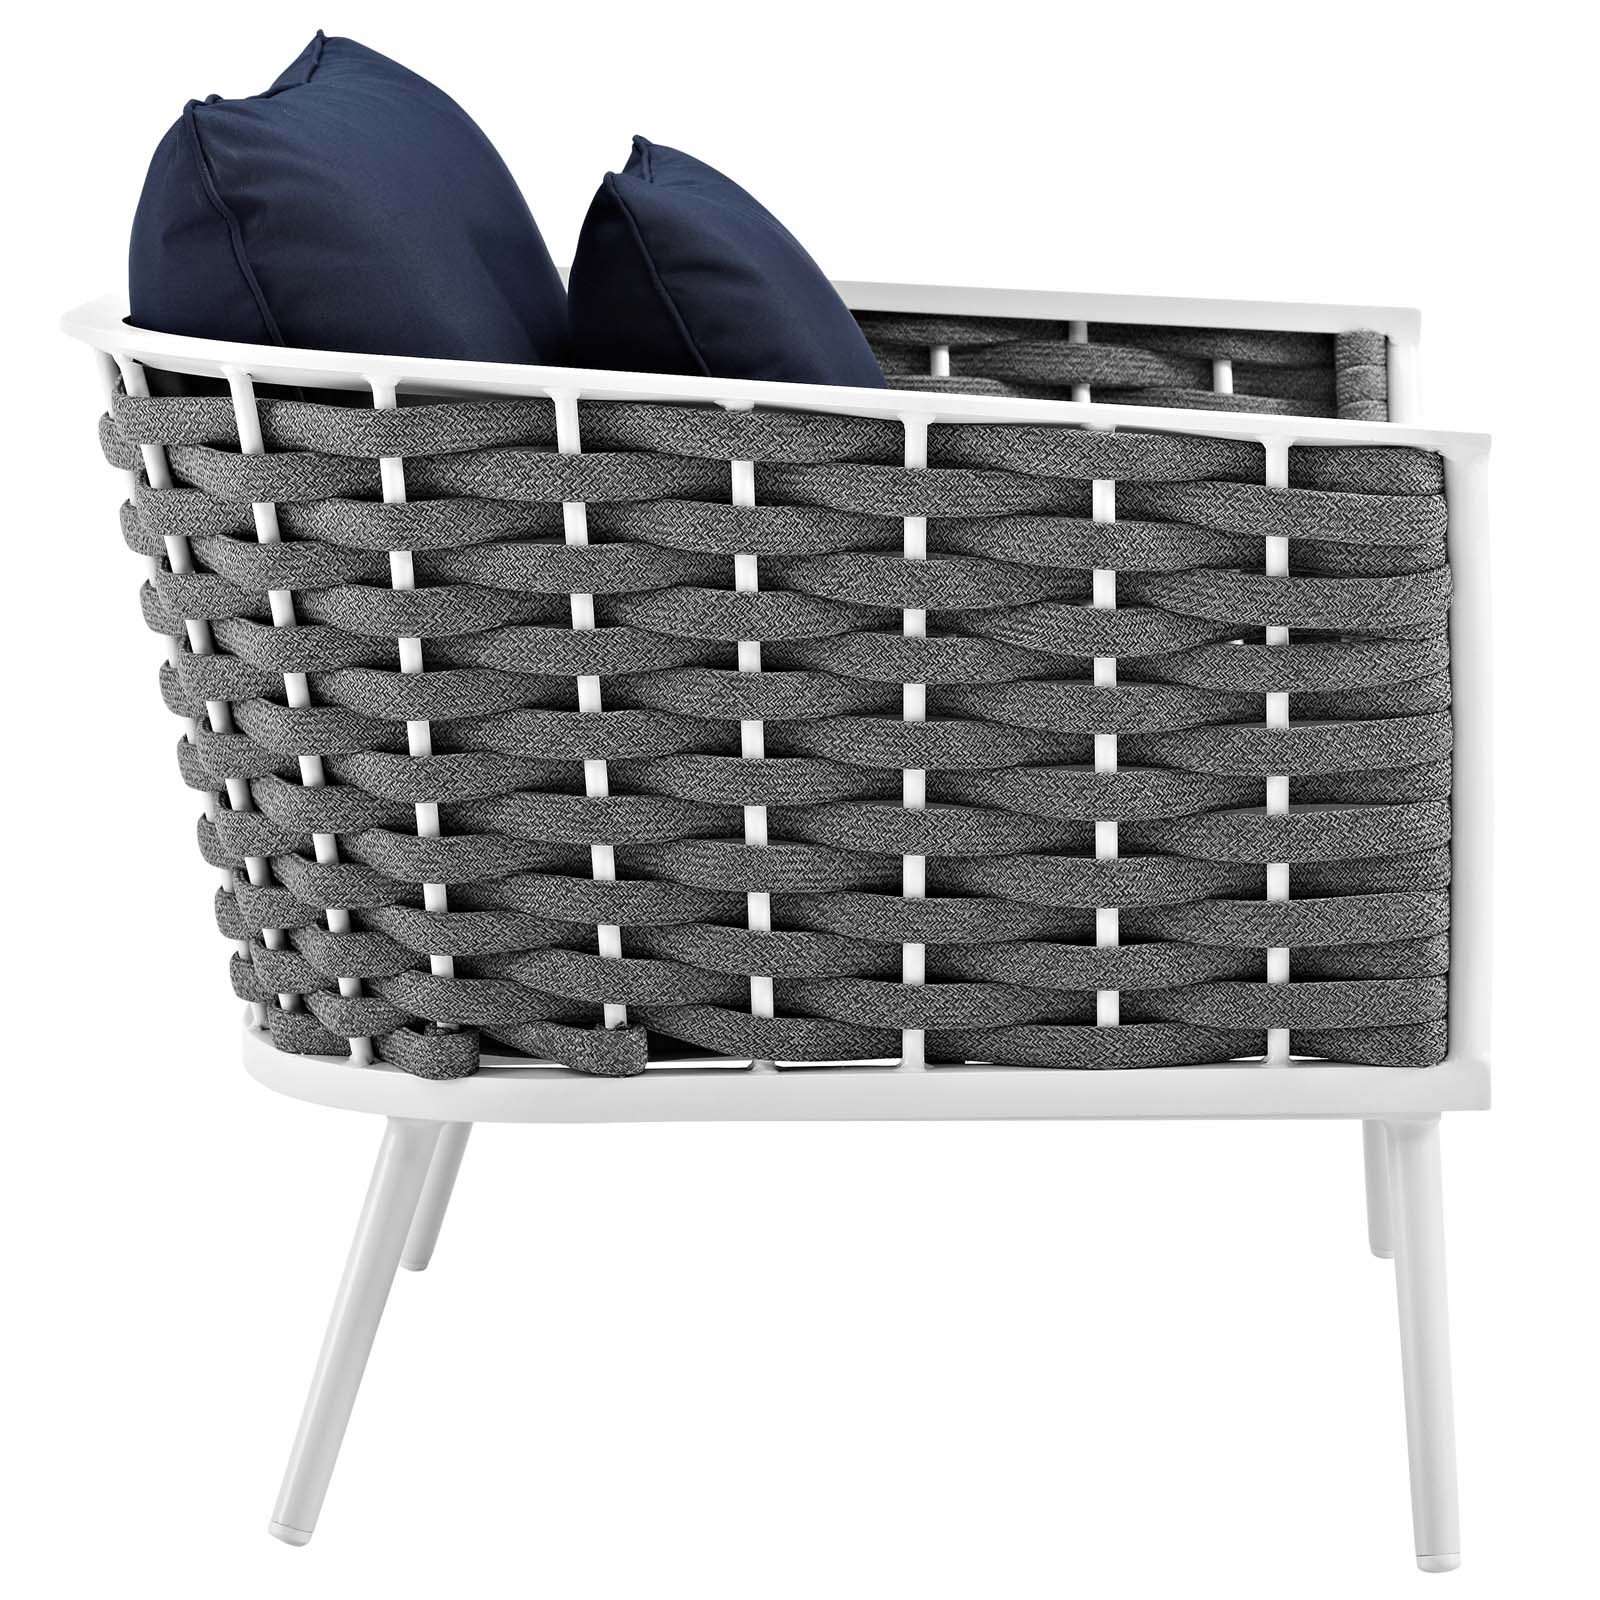 Modern Contemporary Urban Outdoor Patio Balcony Garden Furniture Lounge Chair Armchair and Side Table Set, Fabric Aluminium, White Navy - image 3 of 8